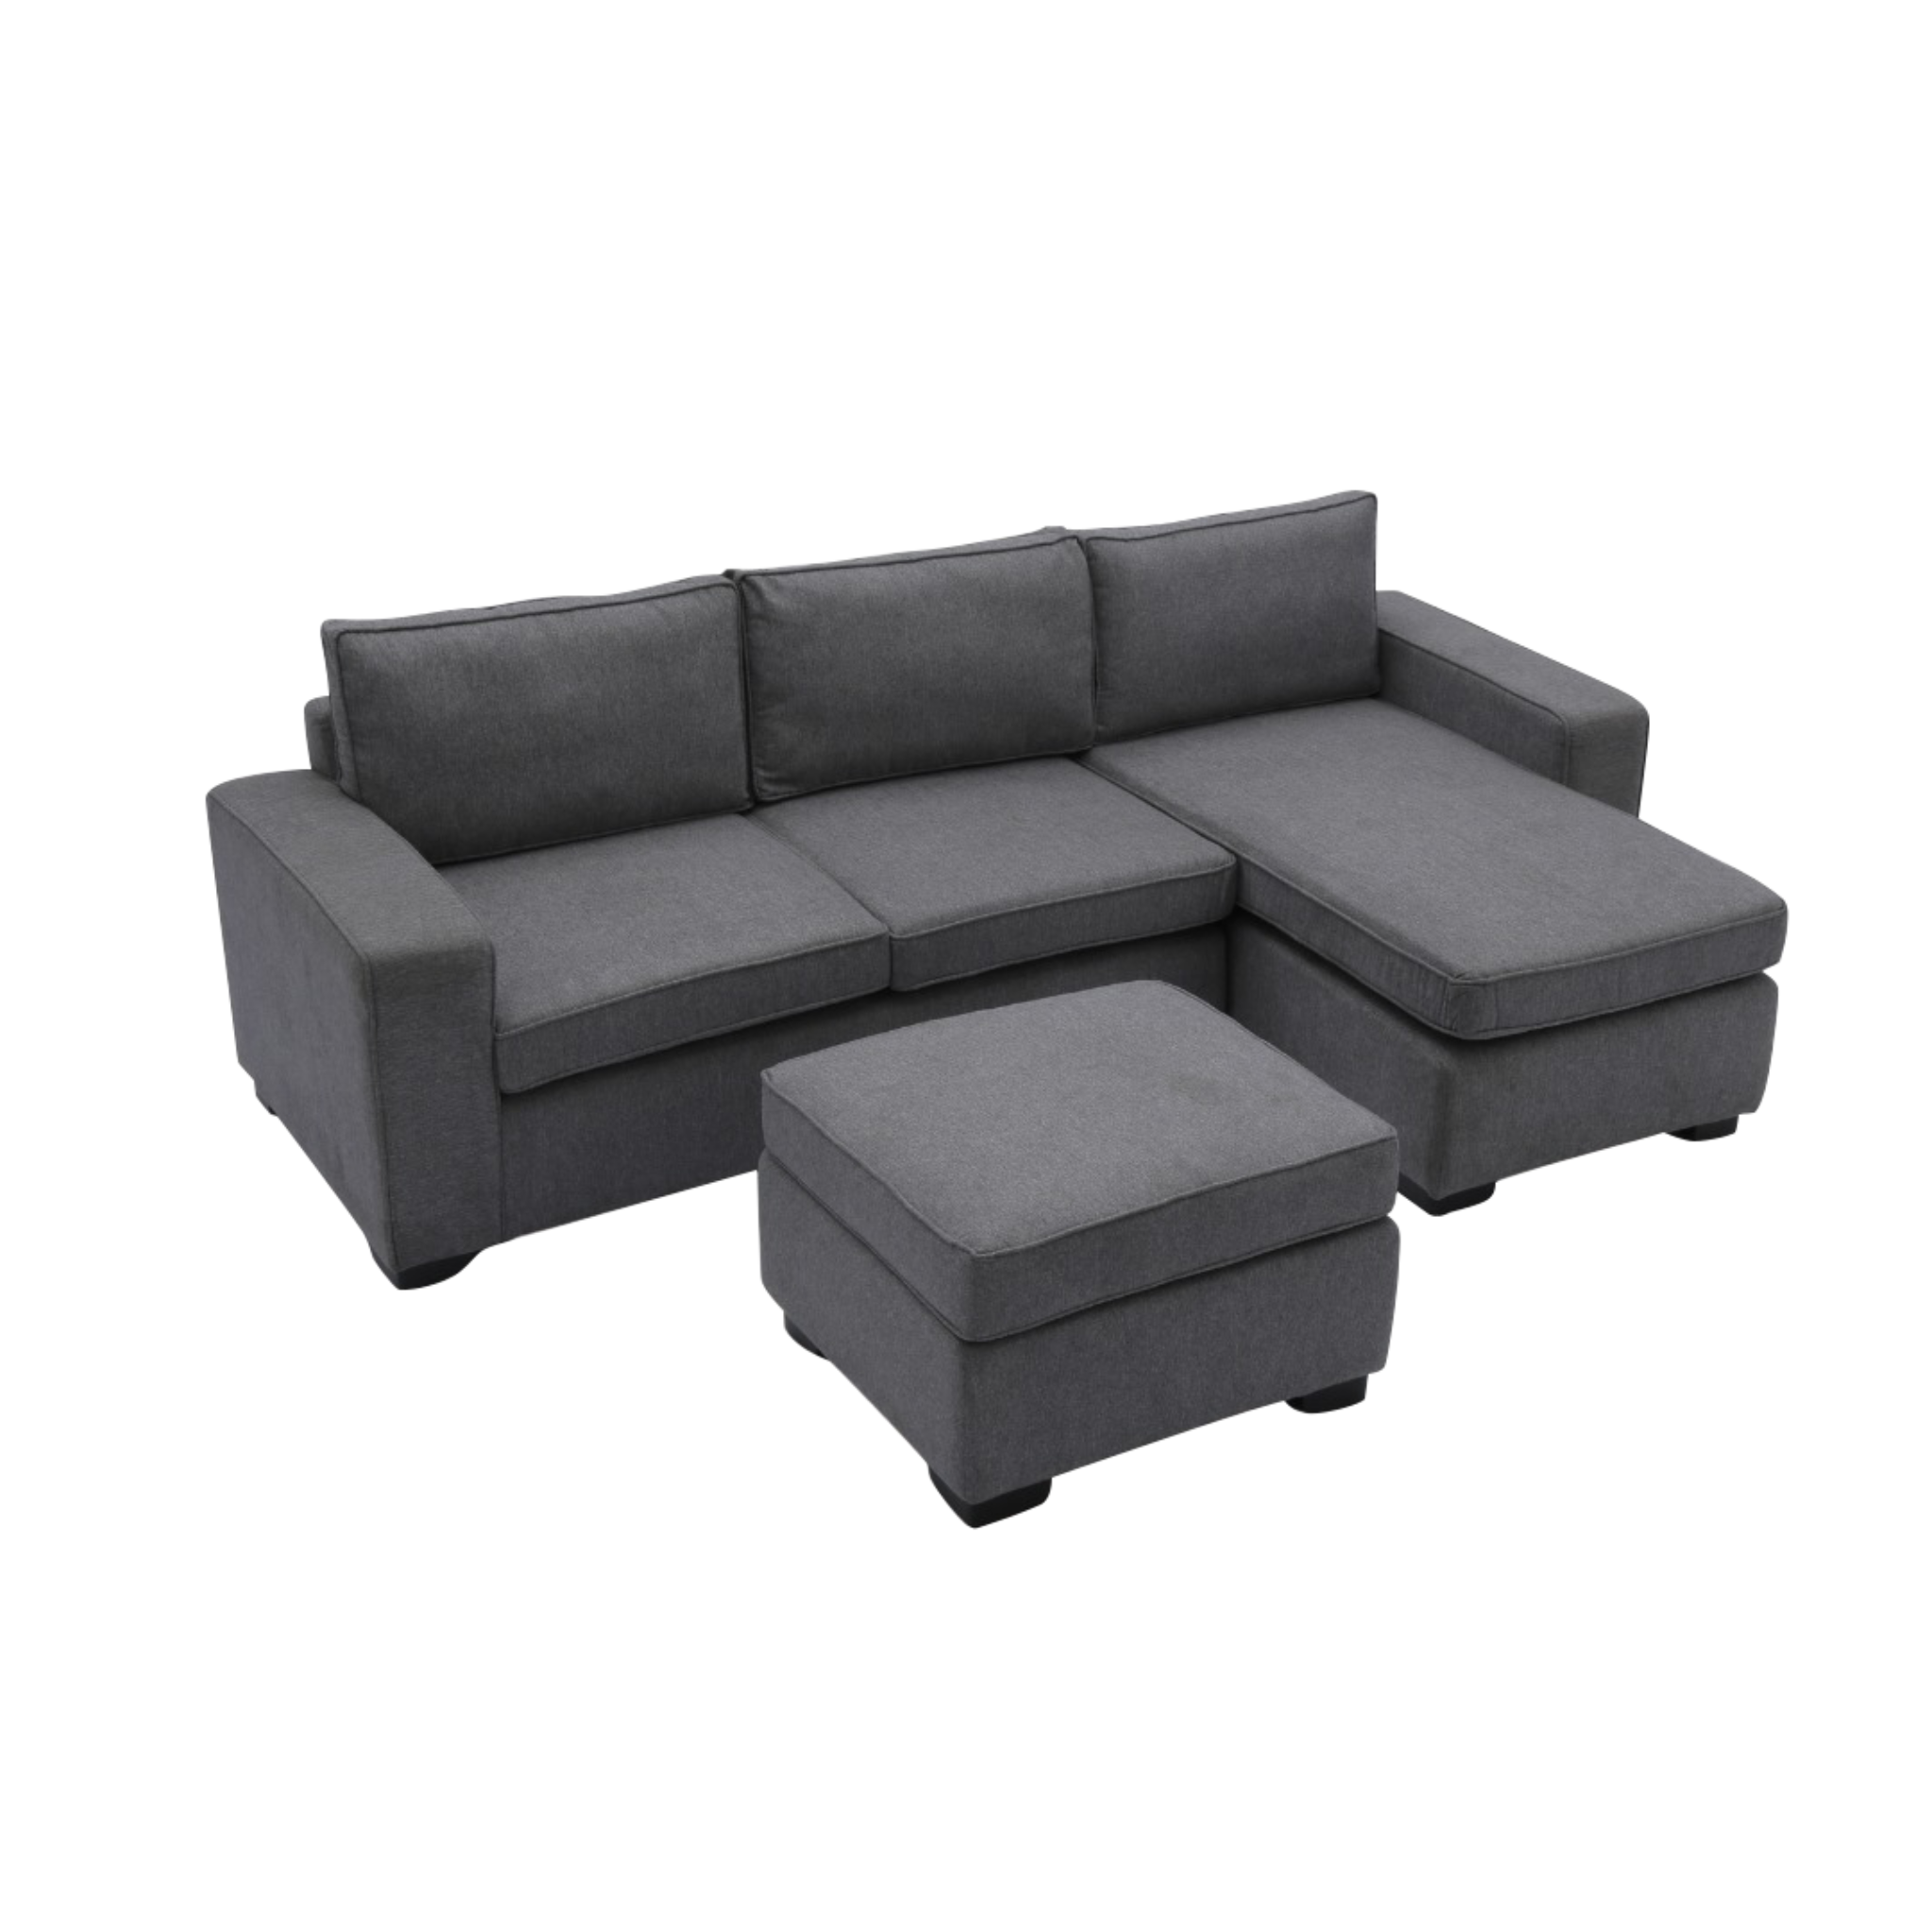 JENALD Fabric Sofa with Ottoman (Reversible L-Chaise) AF Home